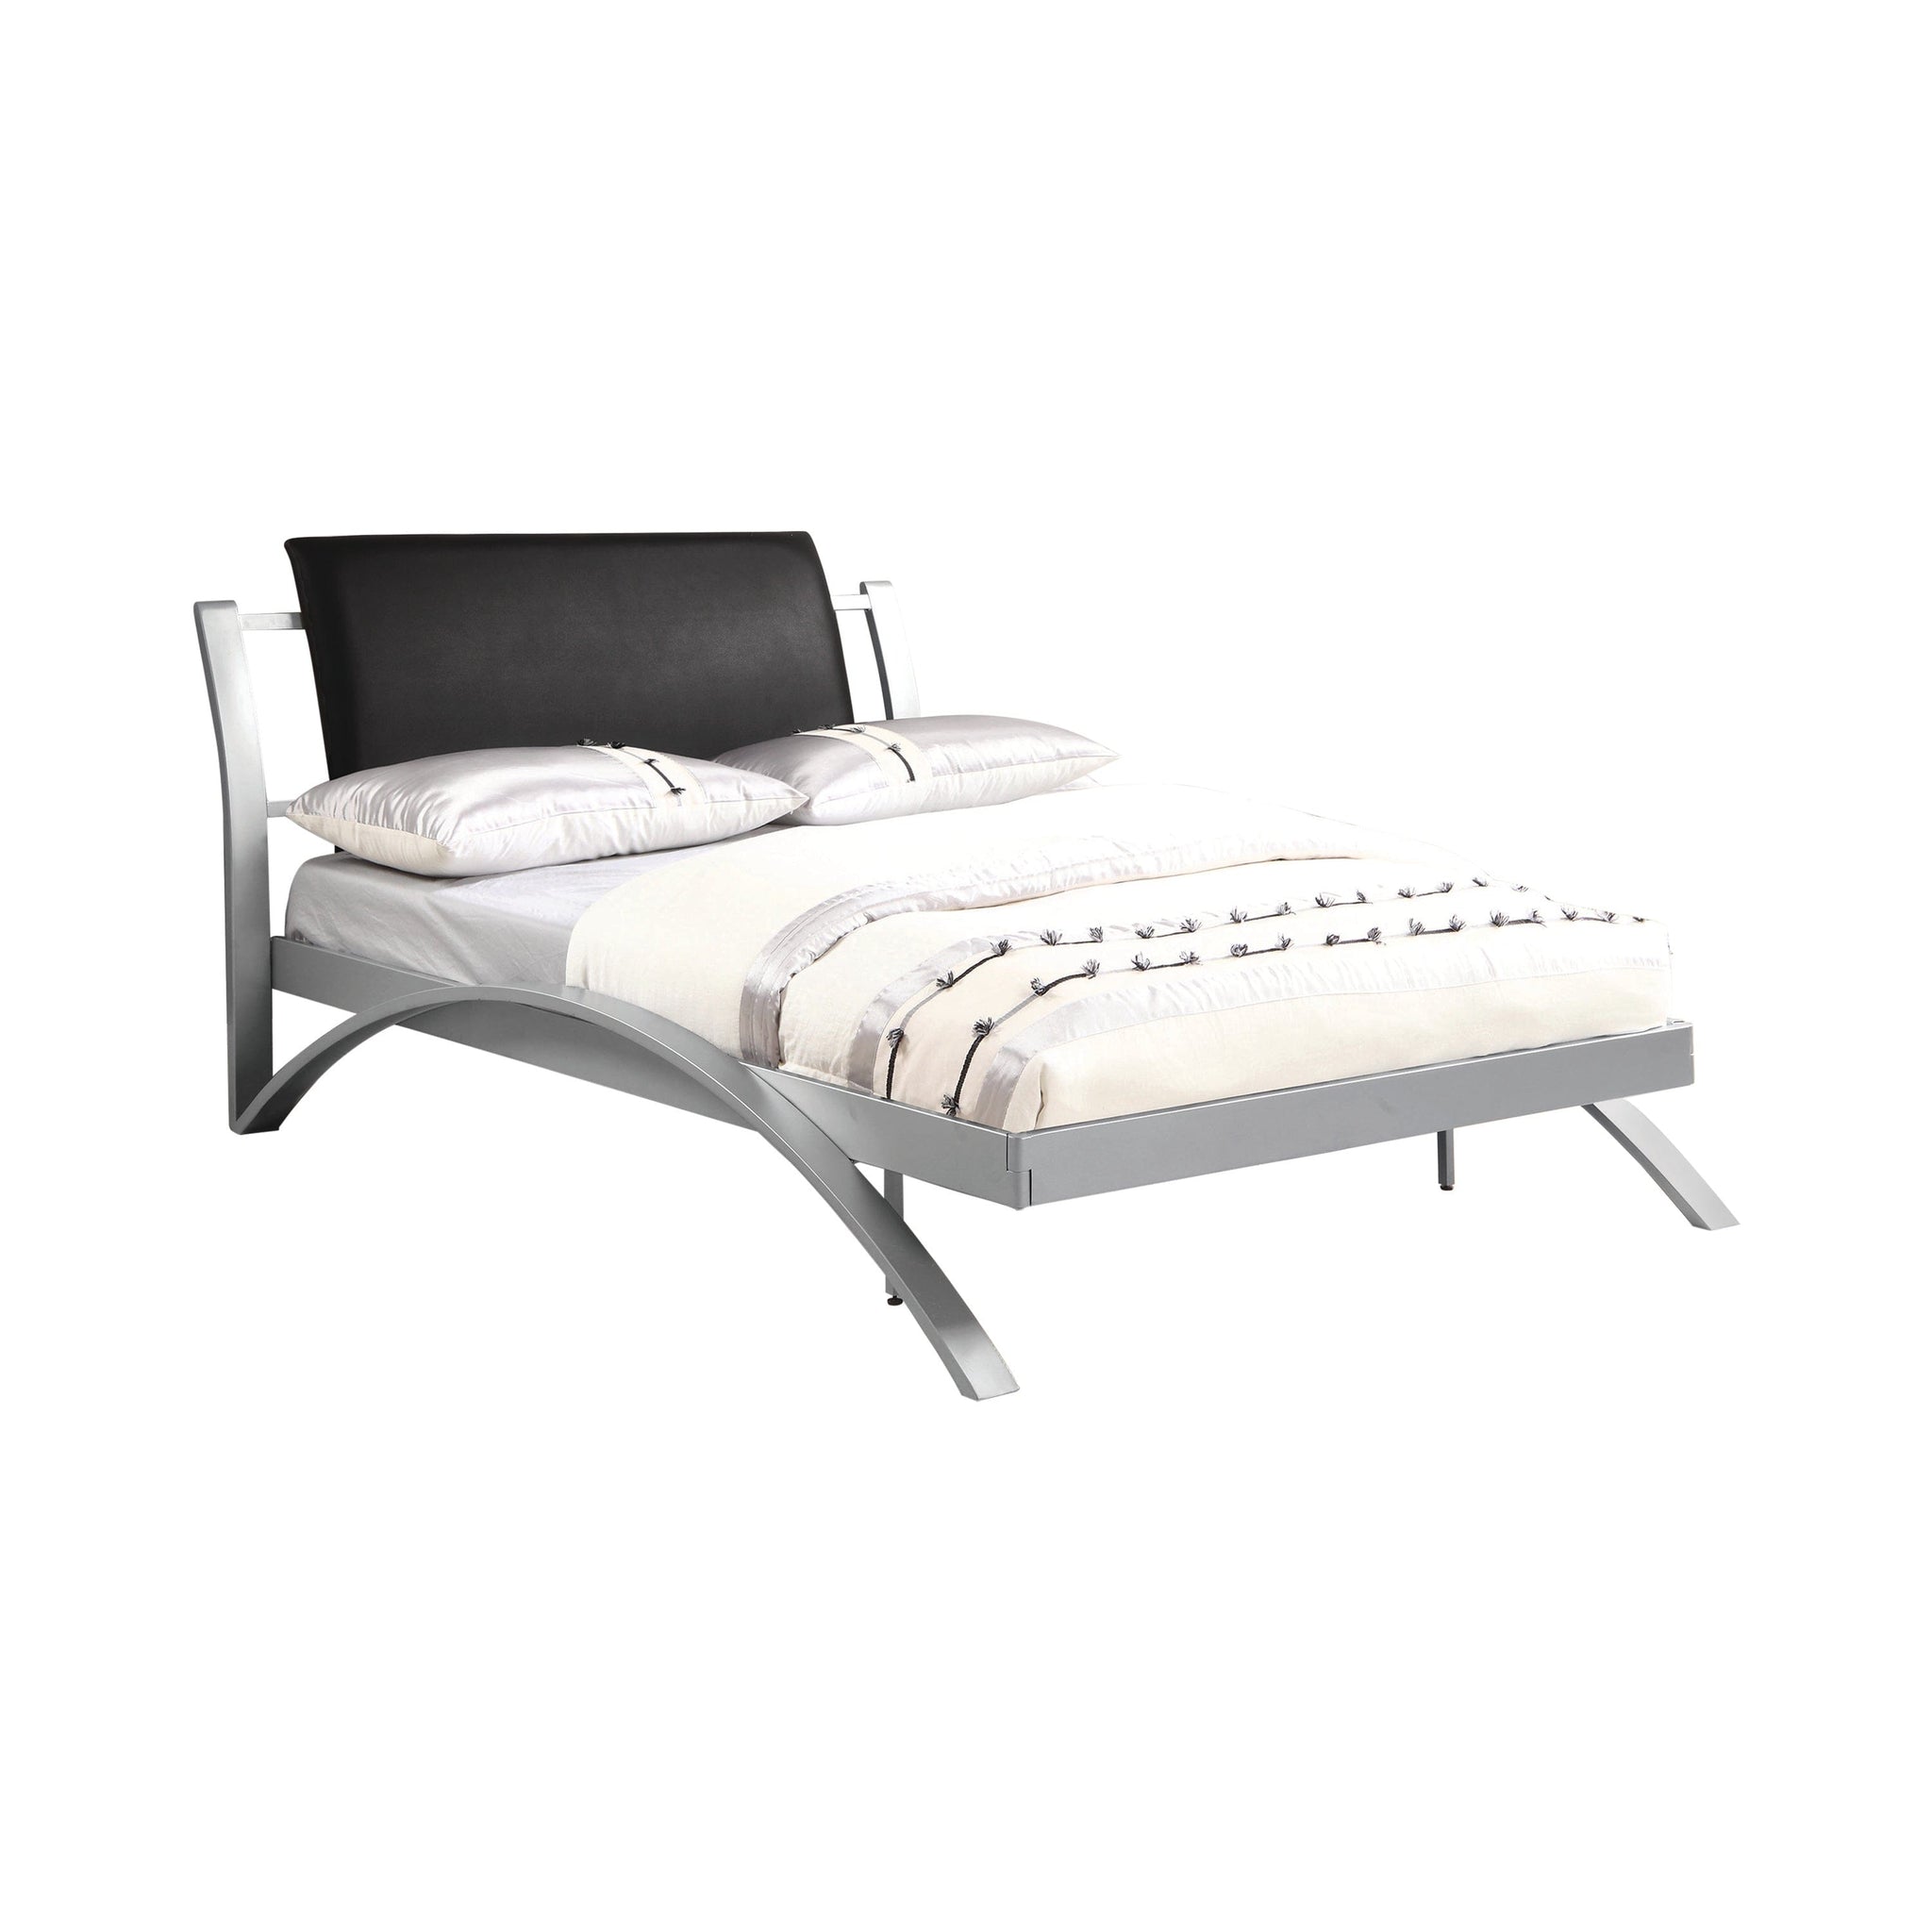 Leclair Full Metal Bed Black And Silver - 300200F